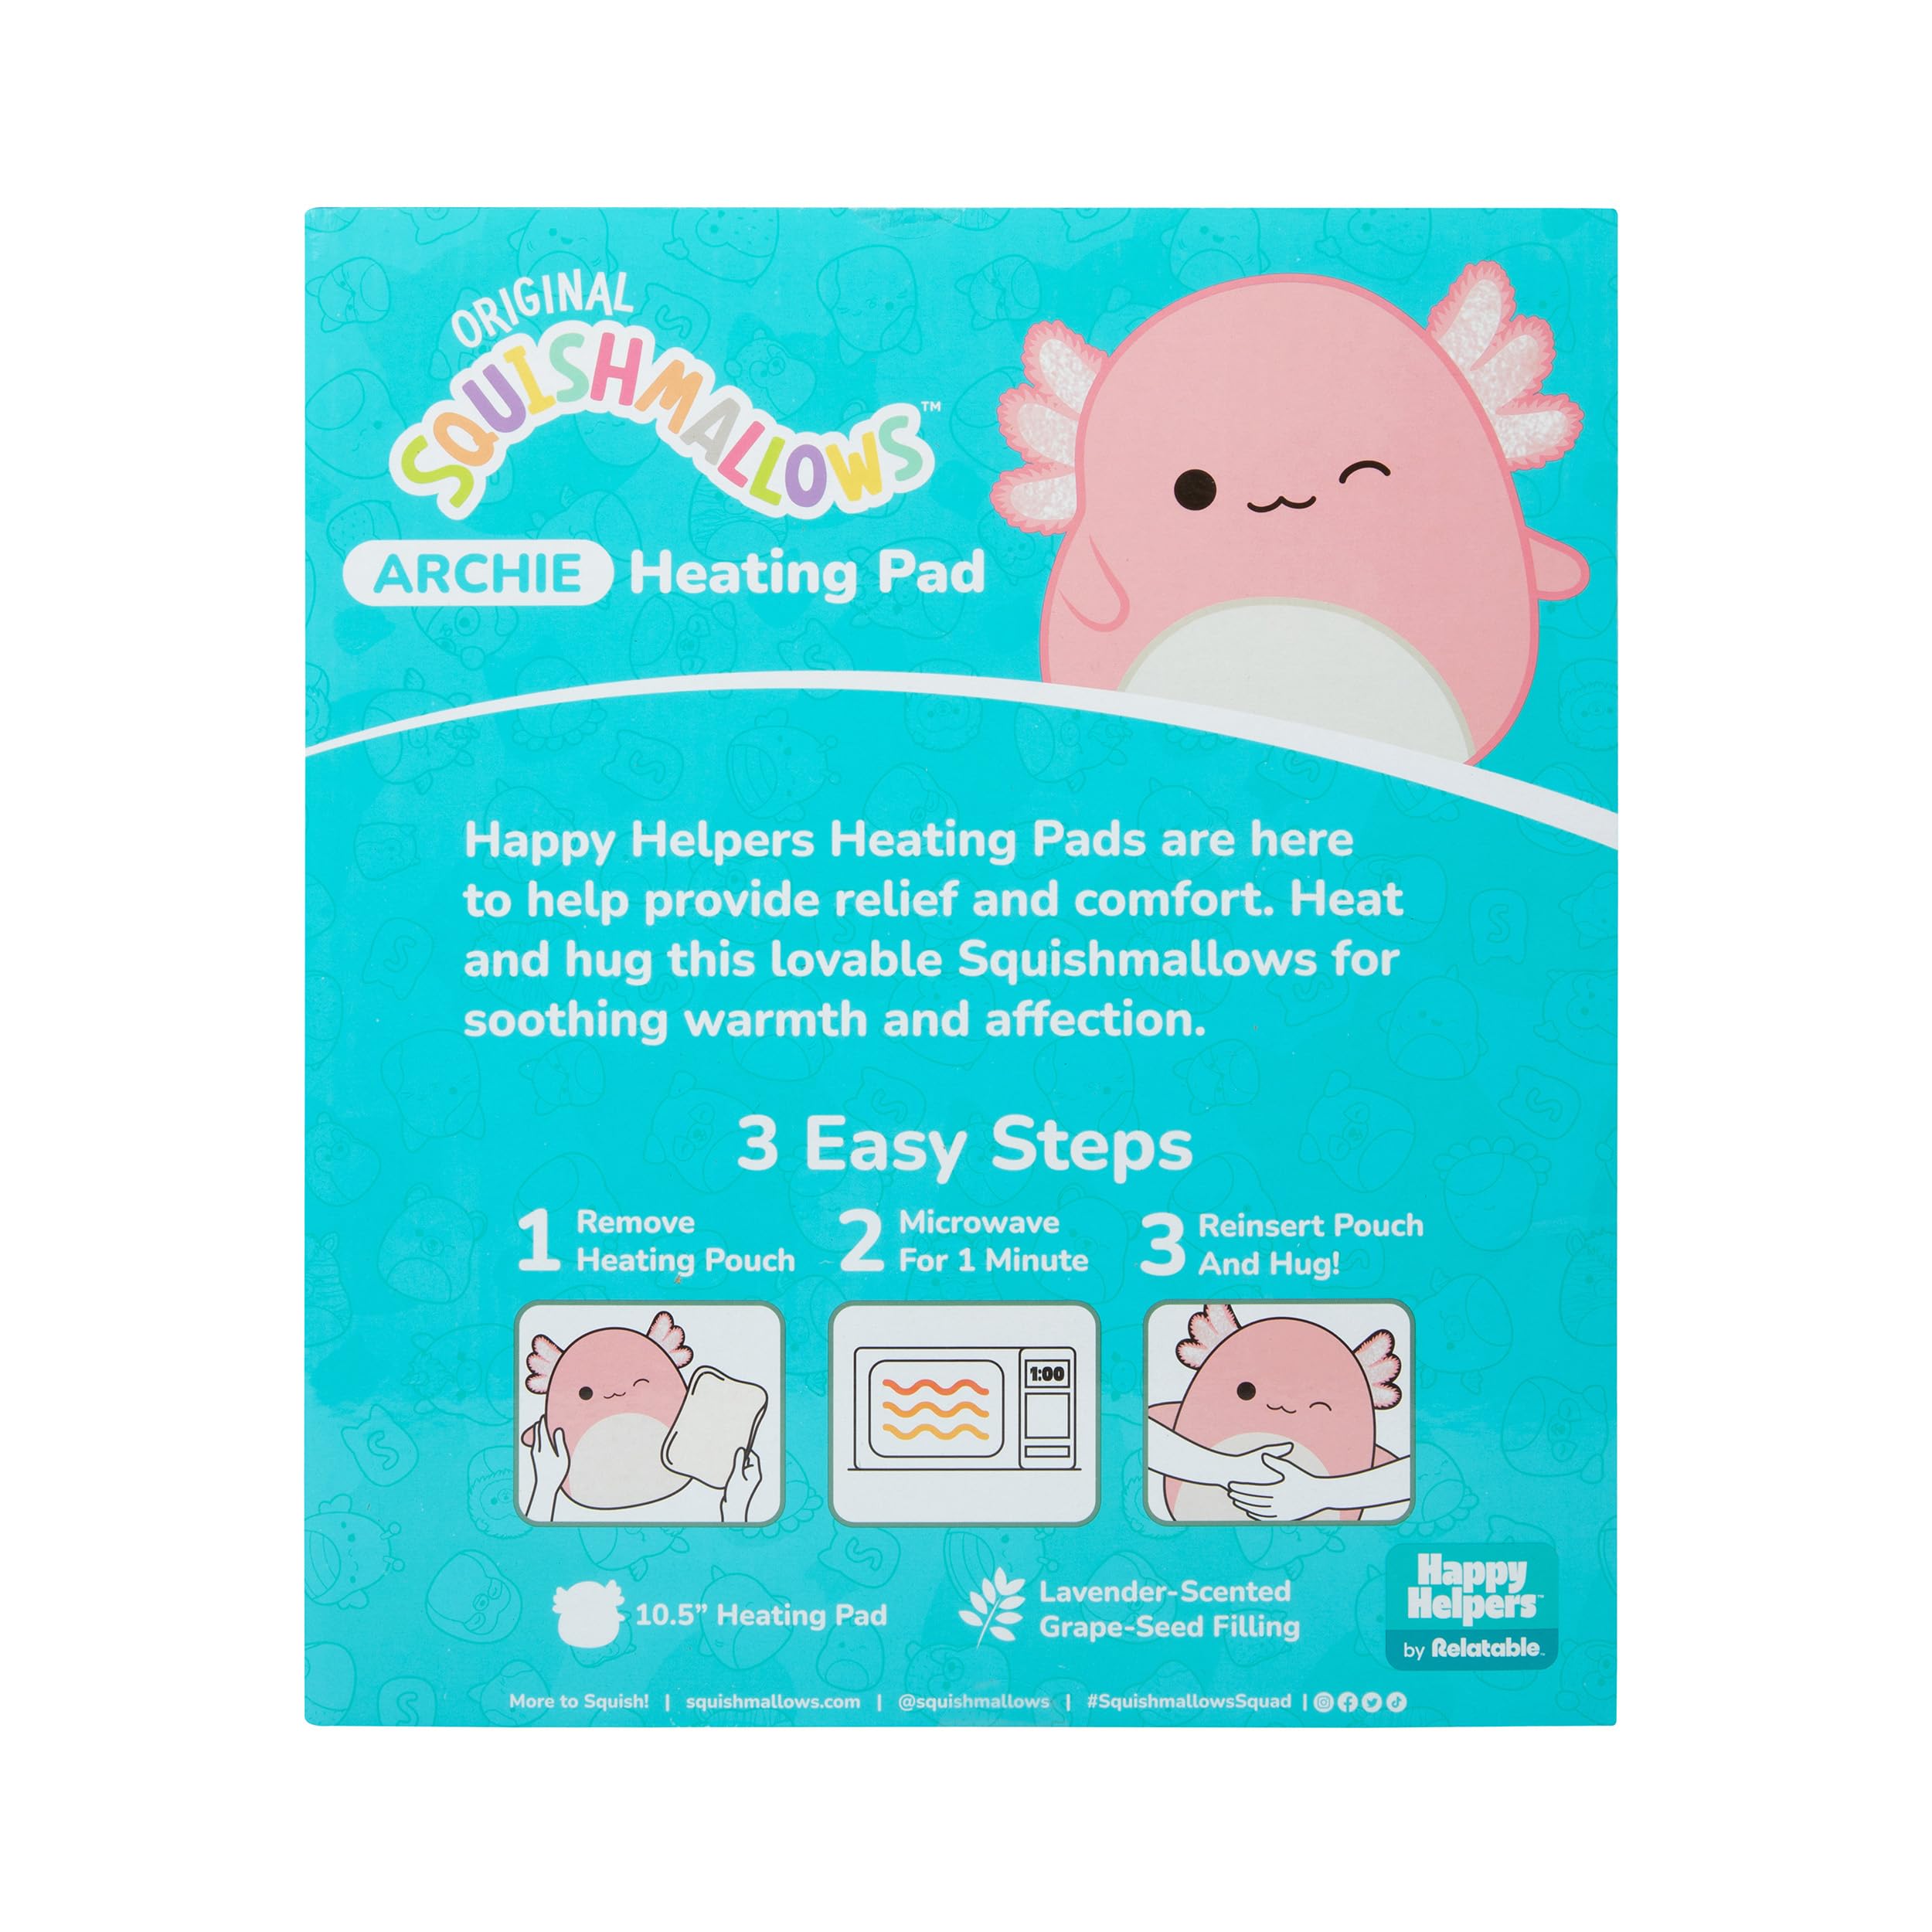 Squishmallows Archie The Axolotl Heating Pad - Heating Pad for Cramps by Relatable®